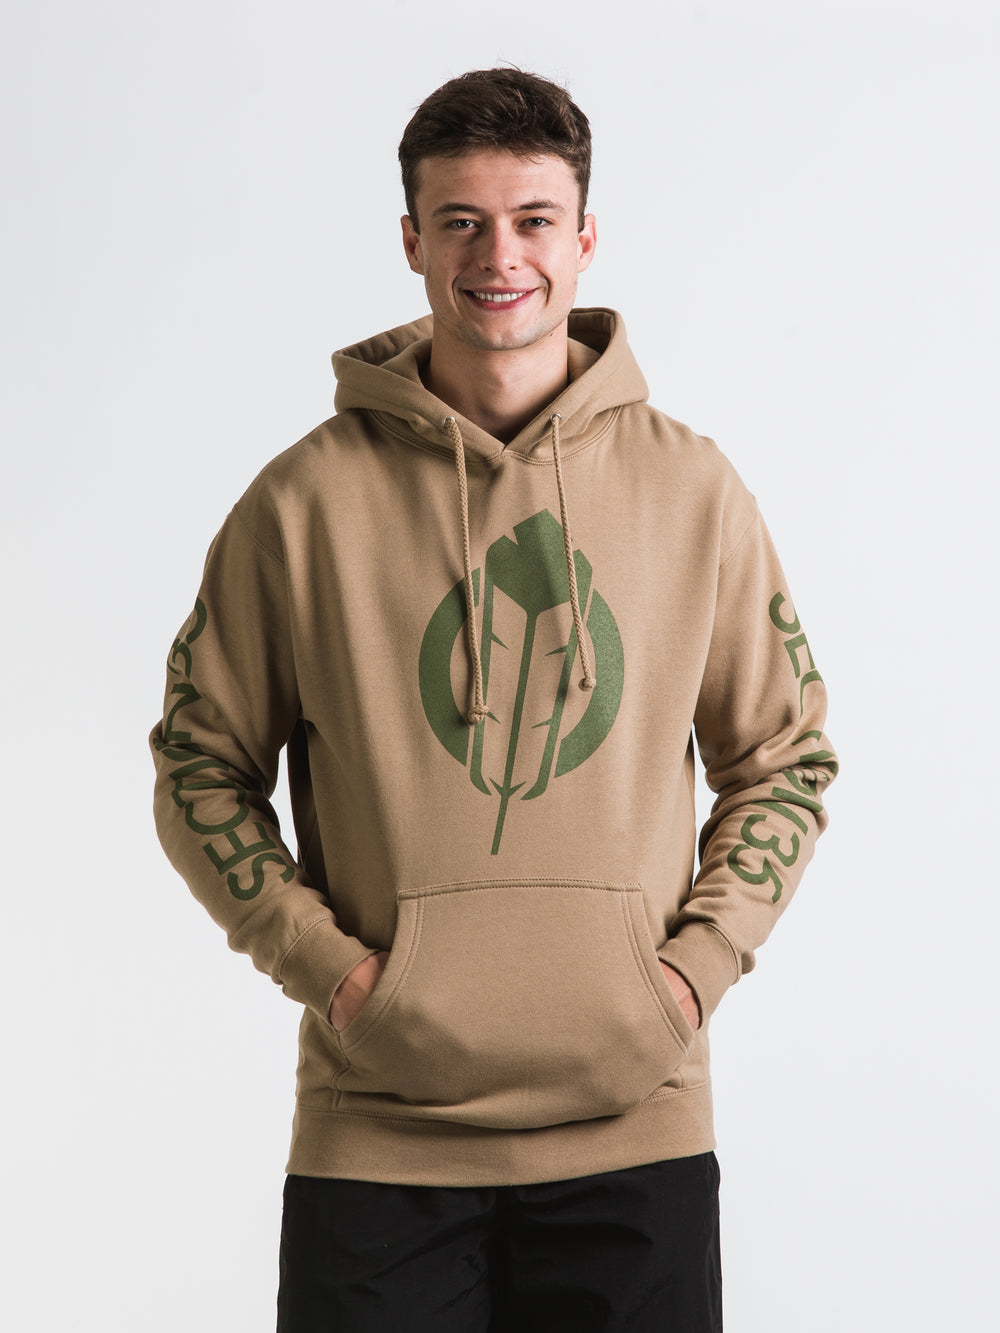 SECTION 35 OG FOREVER PULLOVER HOODIE - CLEARANCE